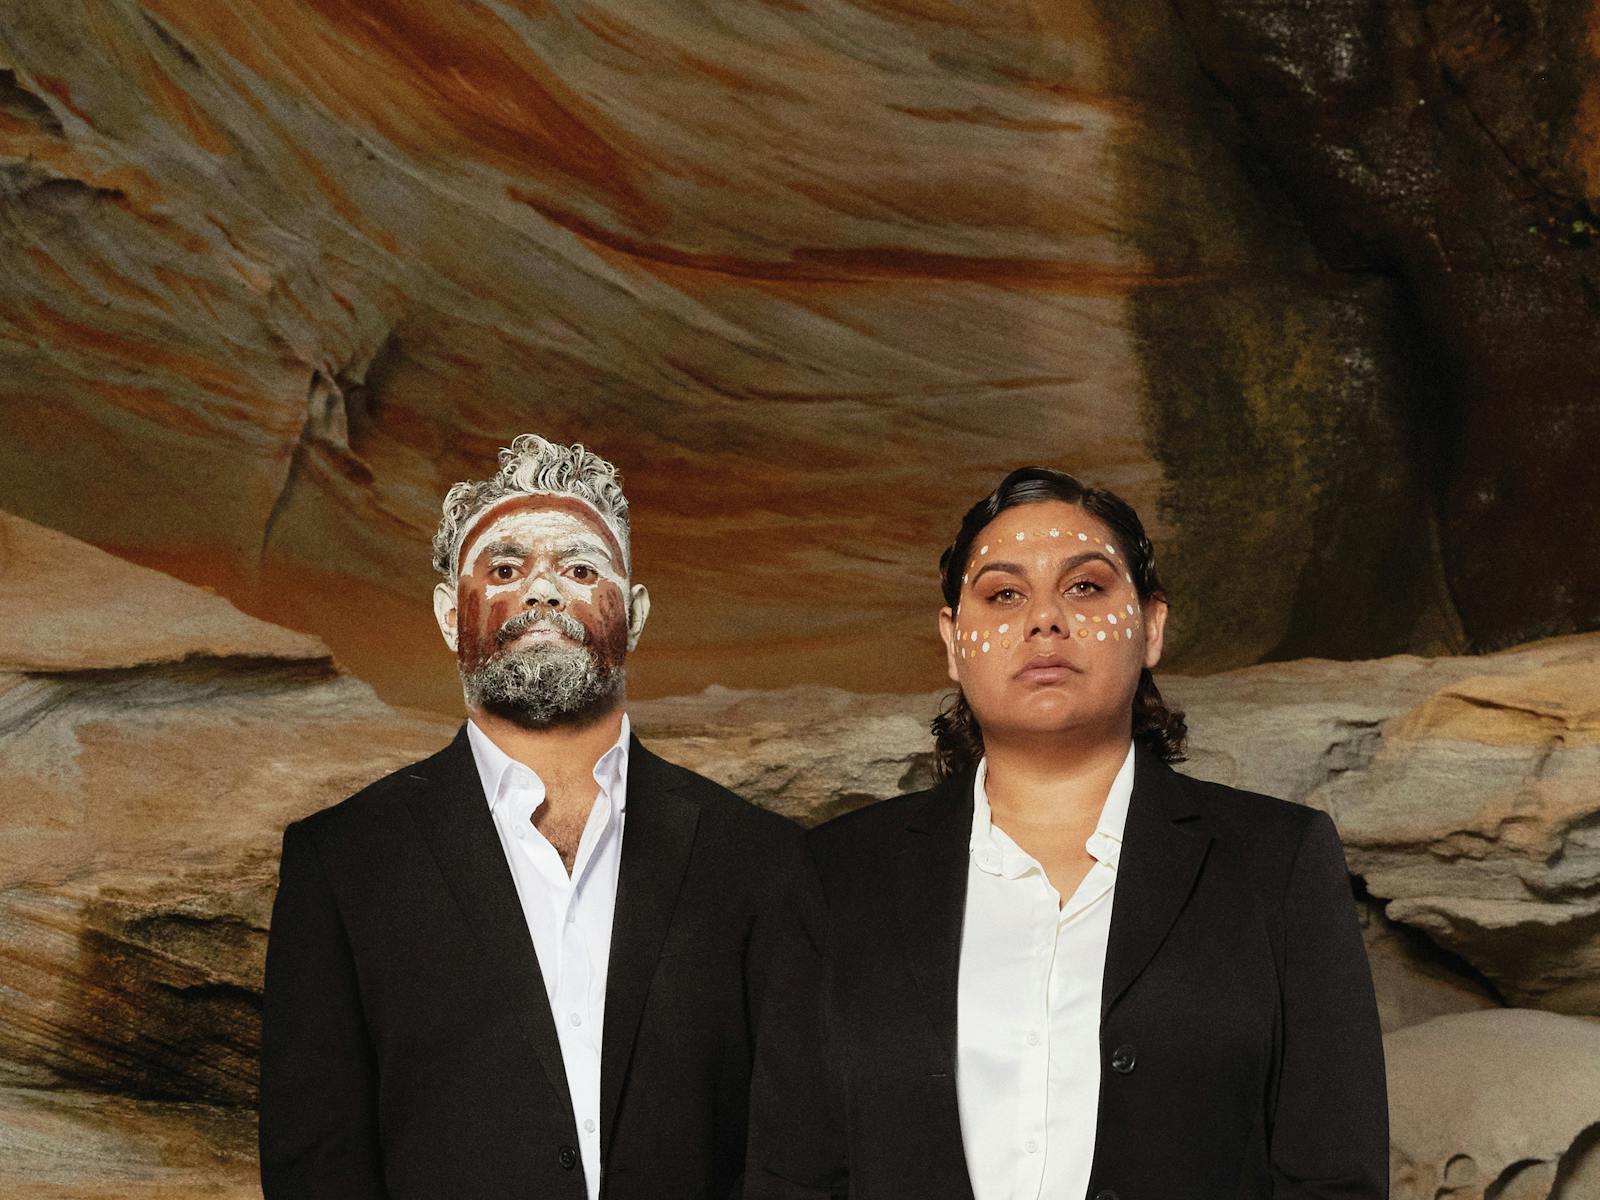 Two first nations people, are dressed in formal western suits, with their faces painted in ochre.